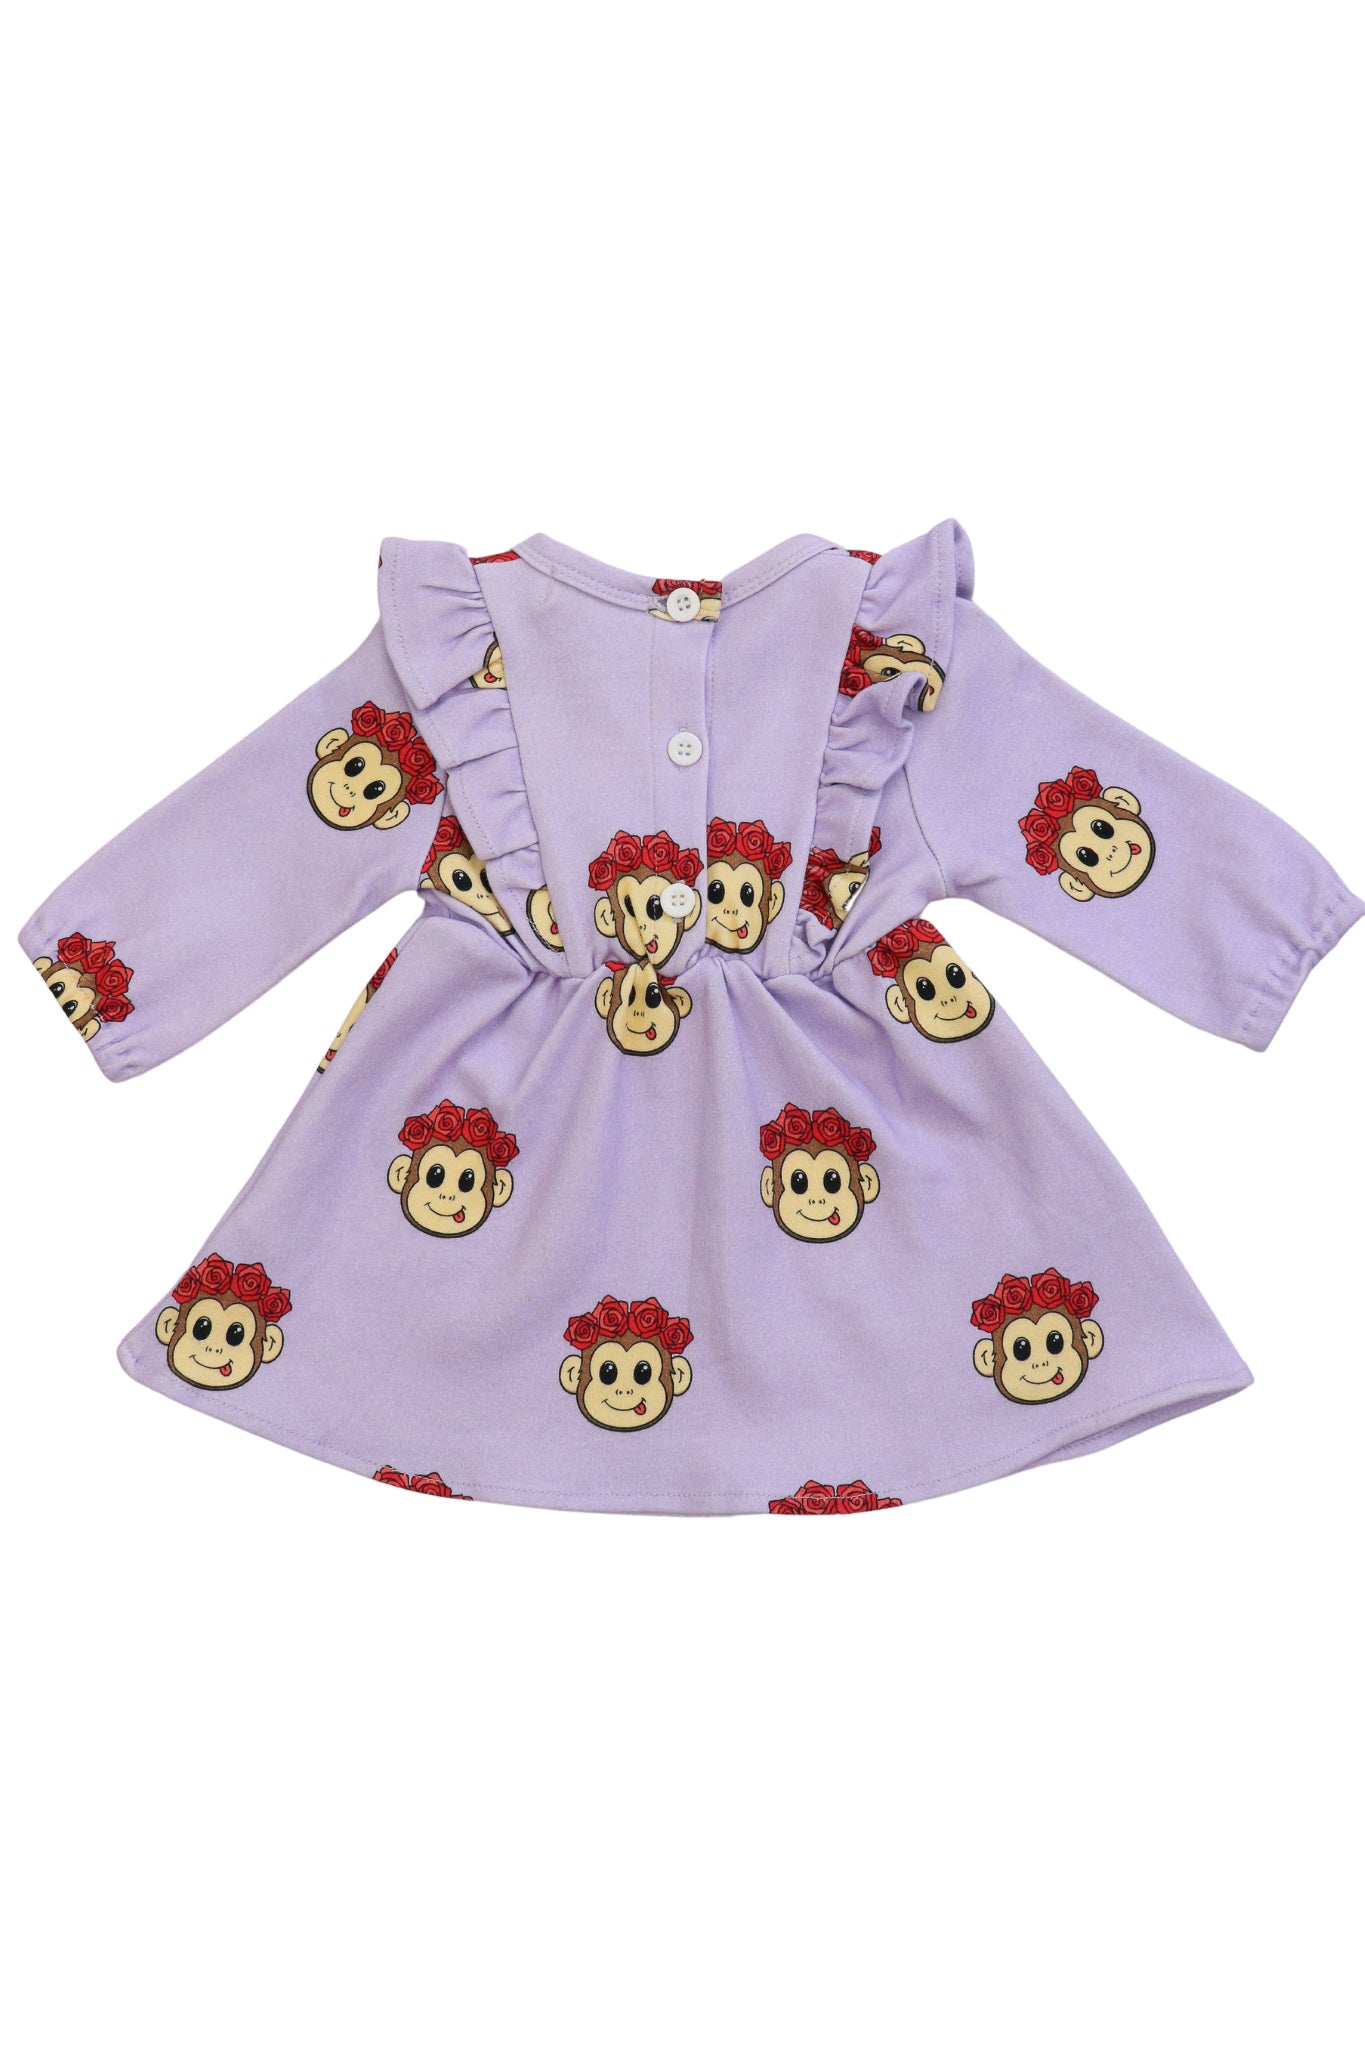 baby girl long sleeve purple dress with frill designs and monkey faces all over